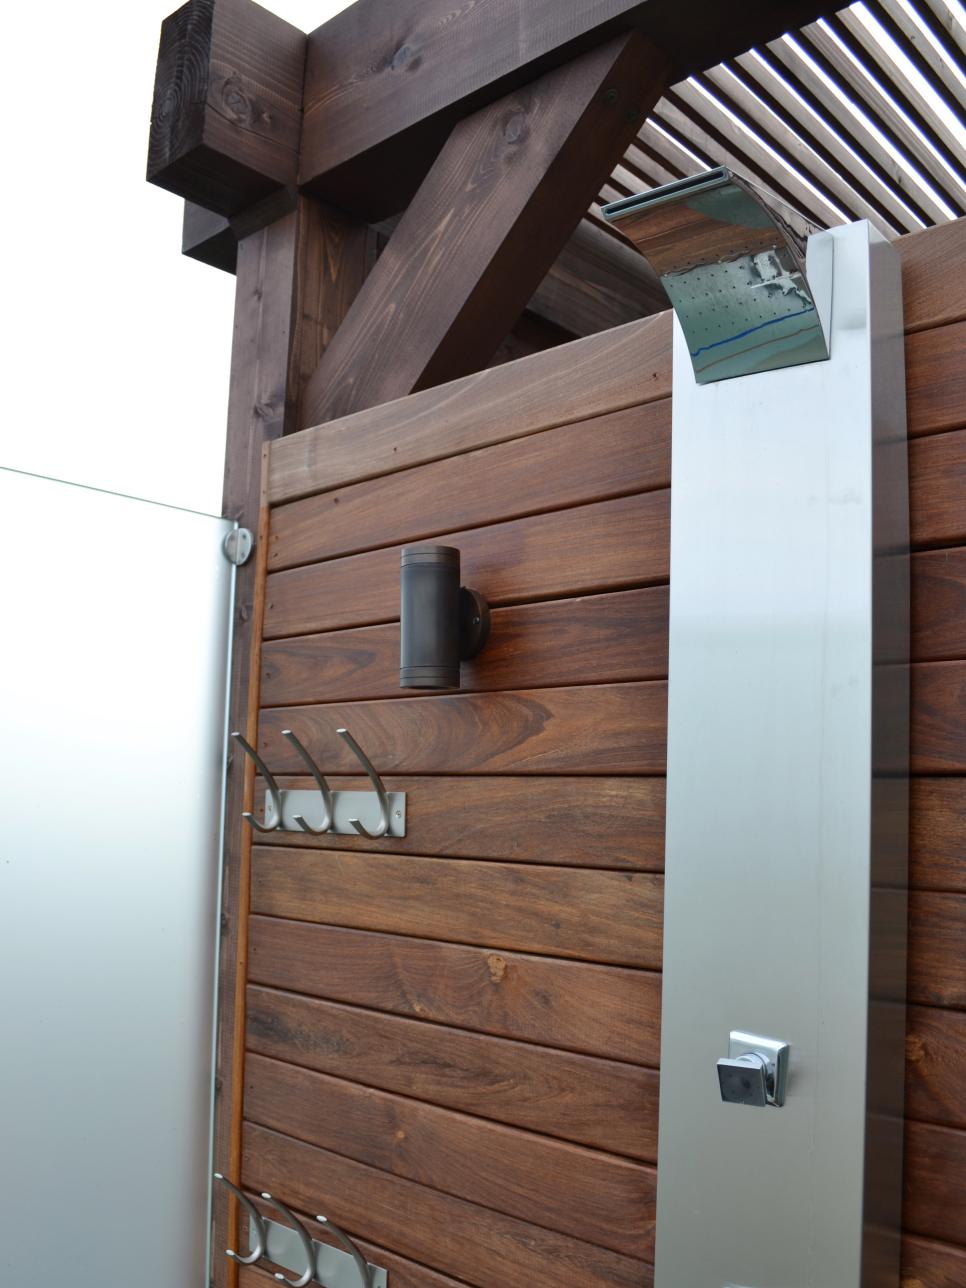 Outdoor Shower With Wood Slats and Stainless Shower Head